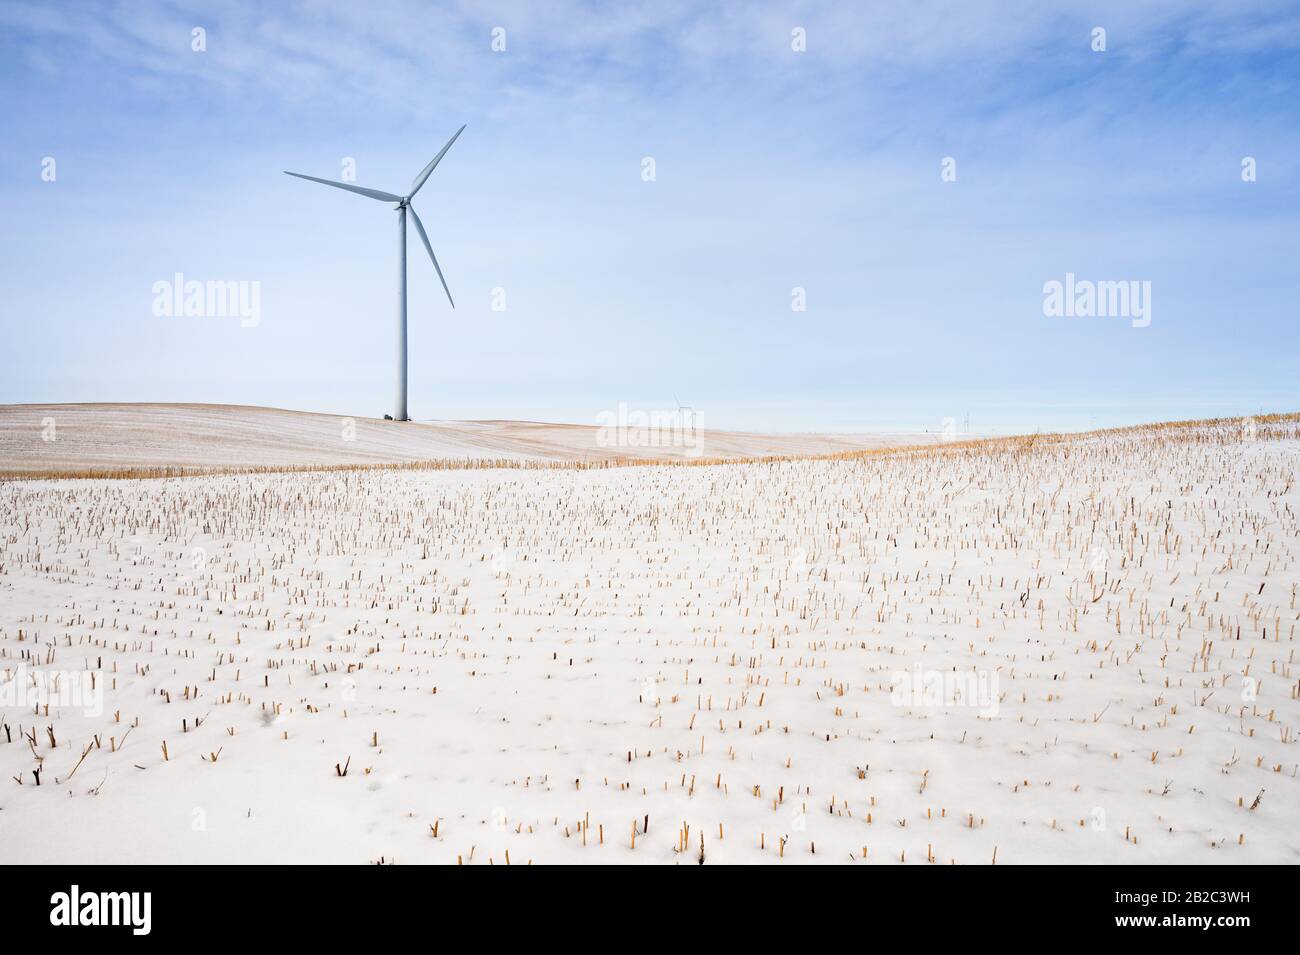 Winter view of wind turbines in an agricultural field near the town of Rosebud, Alberta, Canada Stock Photo